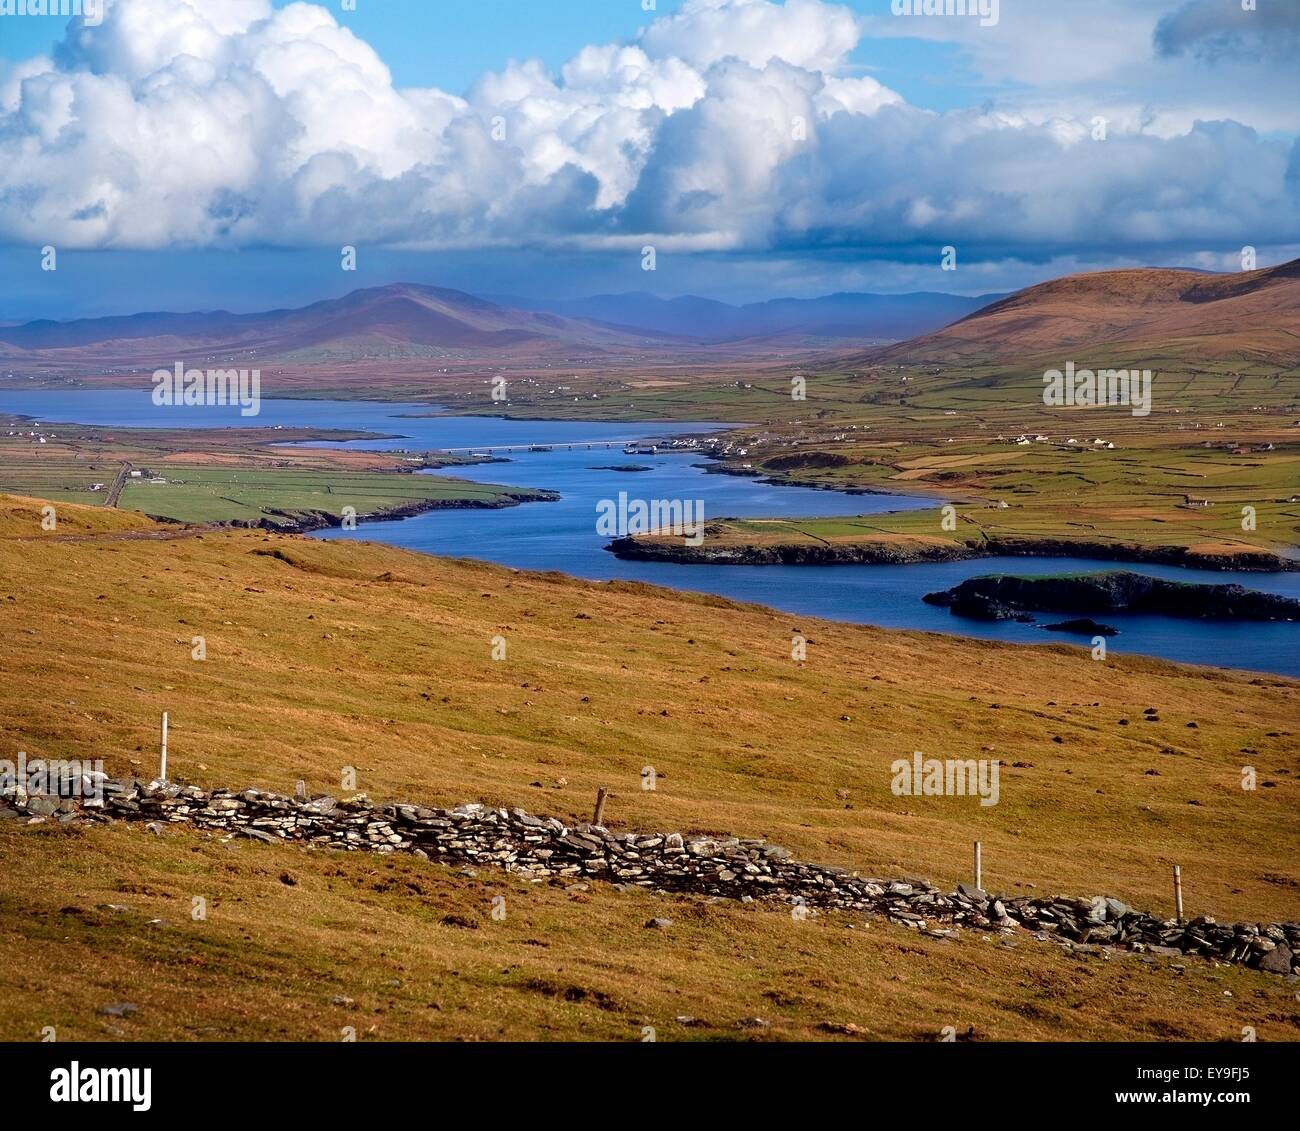 High Angle View Of River Flowing Through A Landscape, Valencia Island, County Kerry, Republic Of Ireland Stock Photo